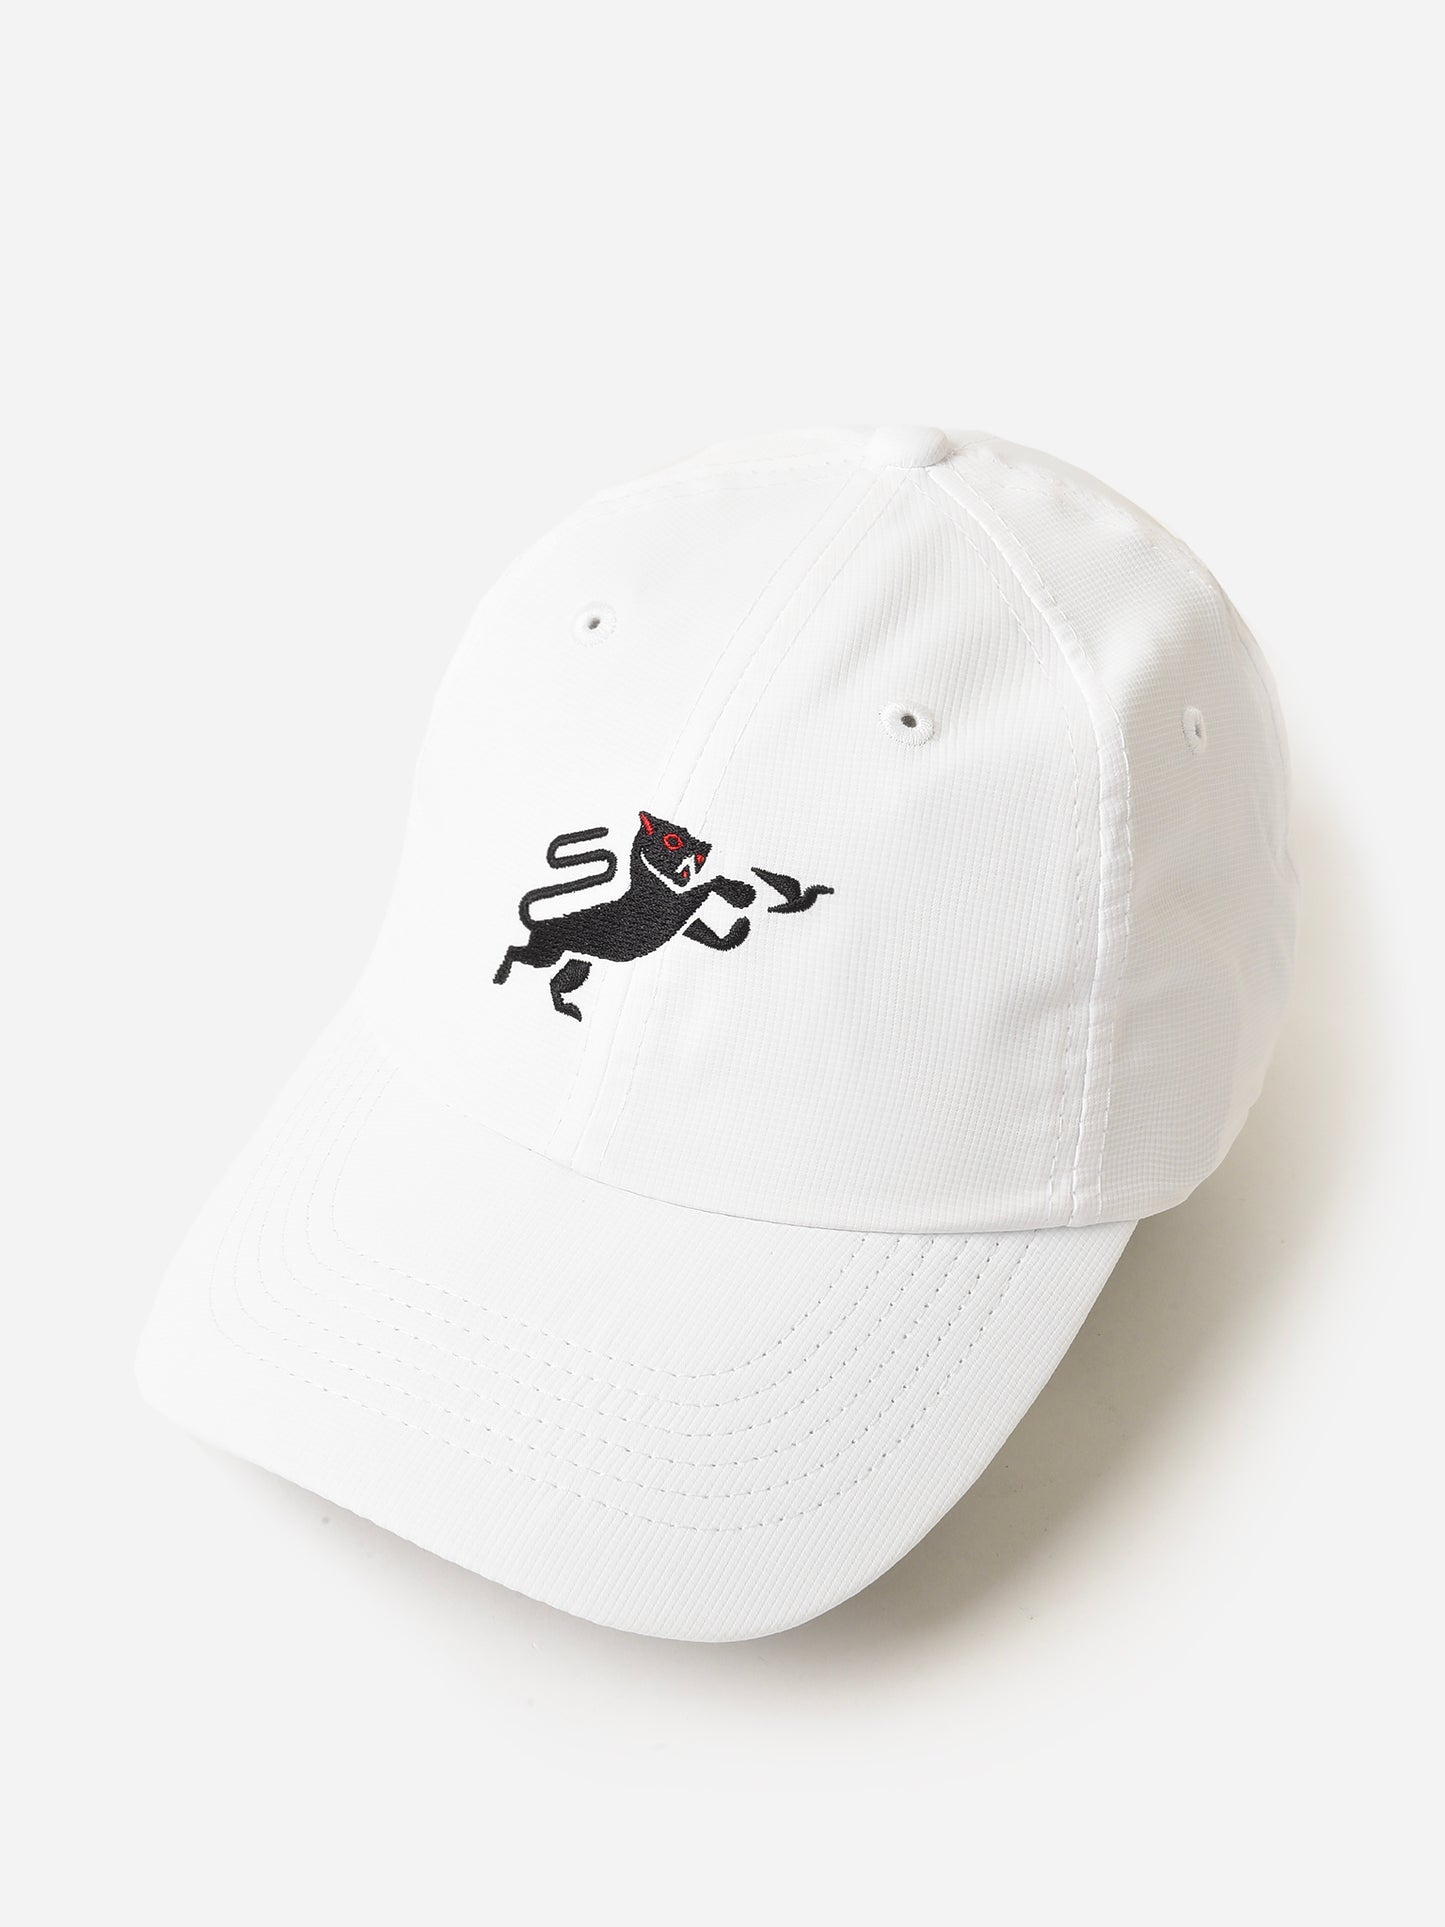 Weekend Panther Performance Hat